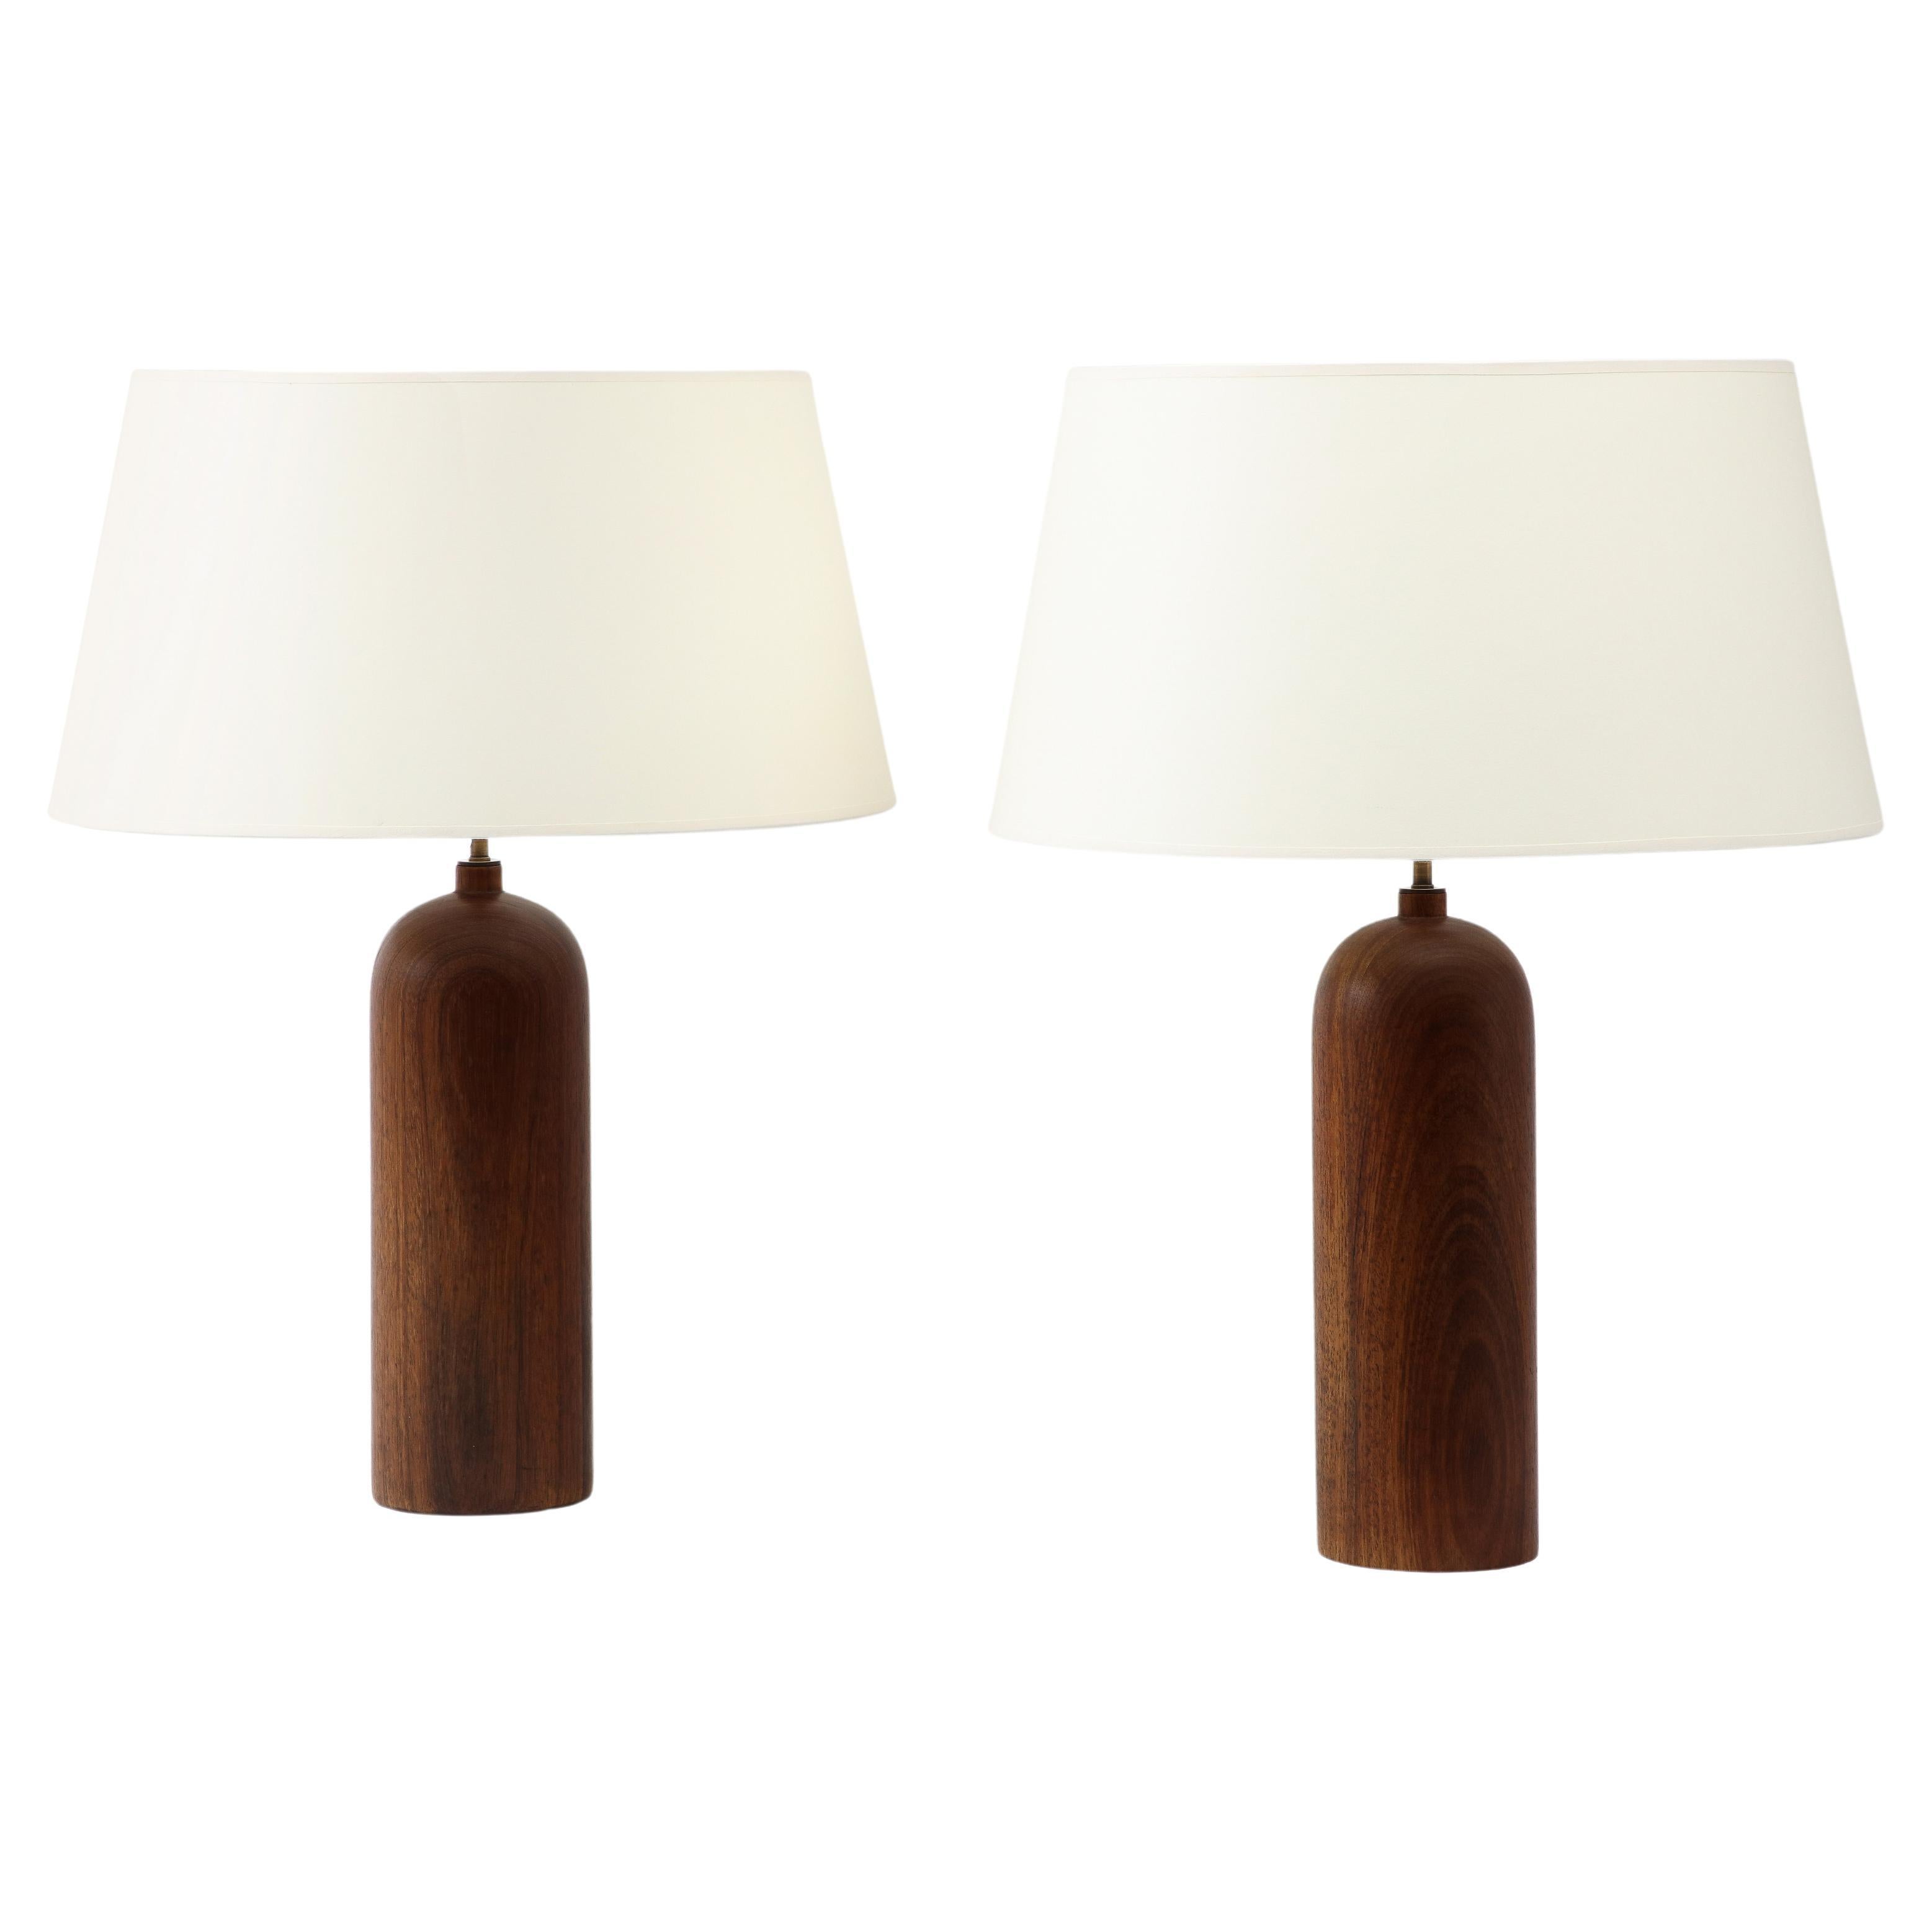 Pair of Large Solid Walnut Table lamps, USA 1960's